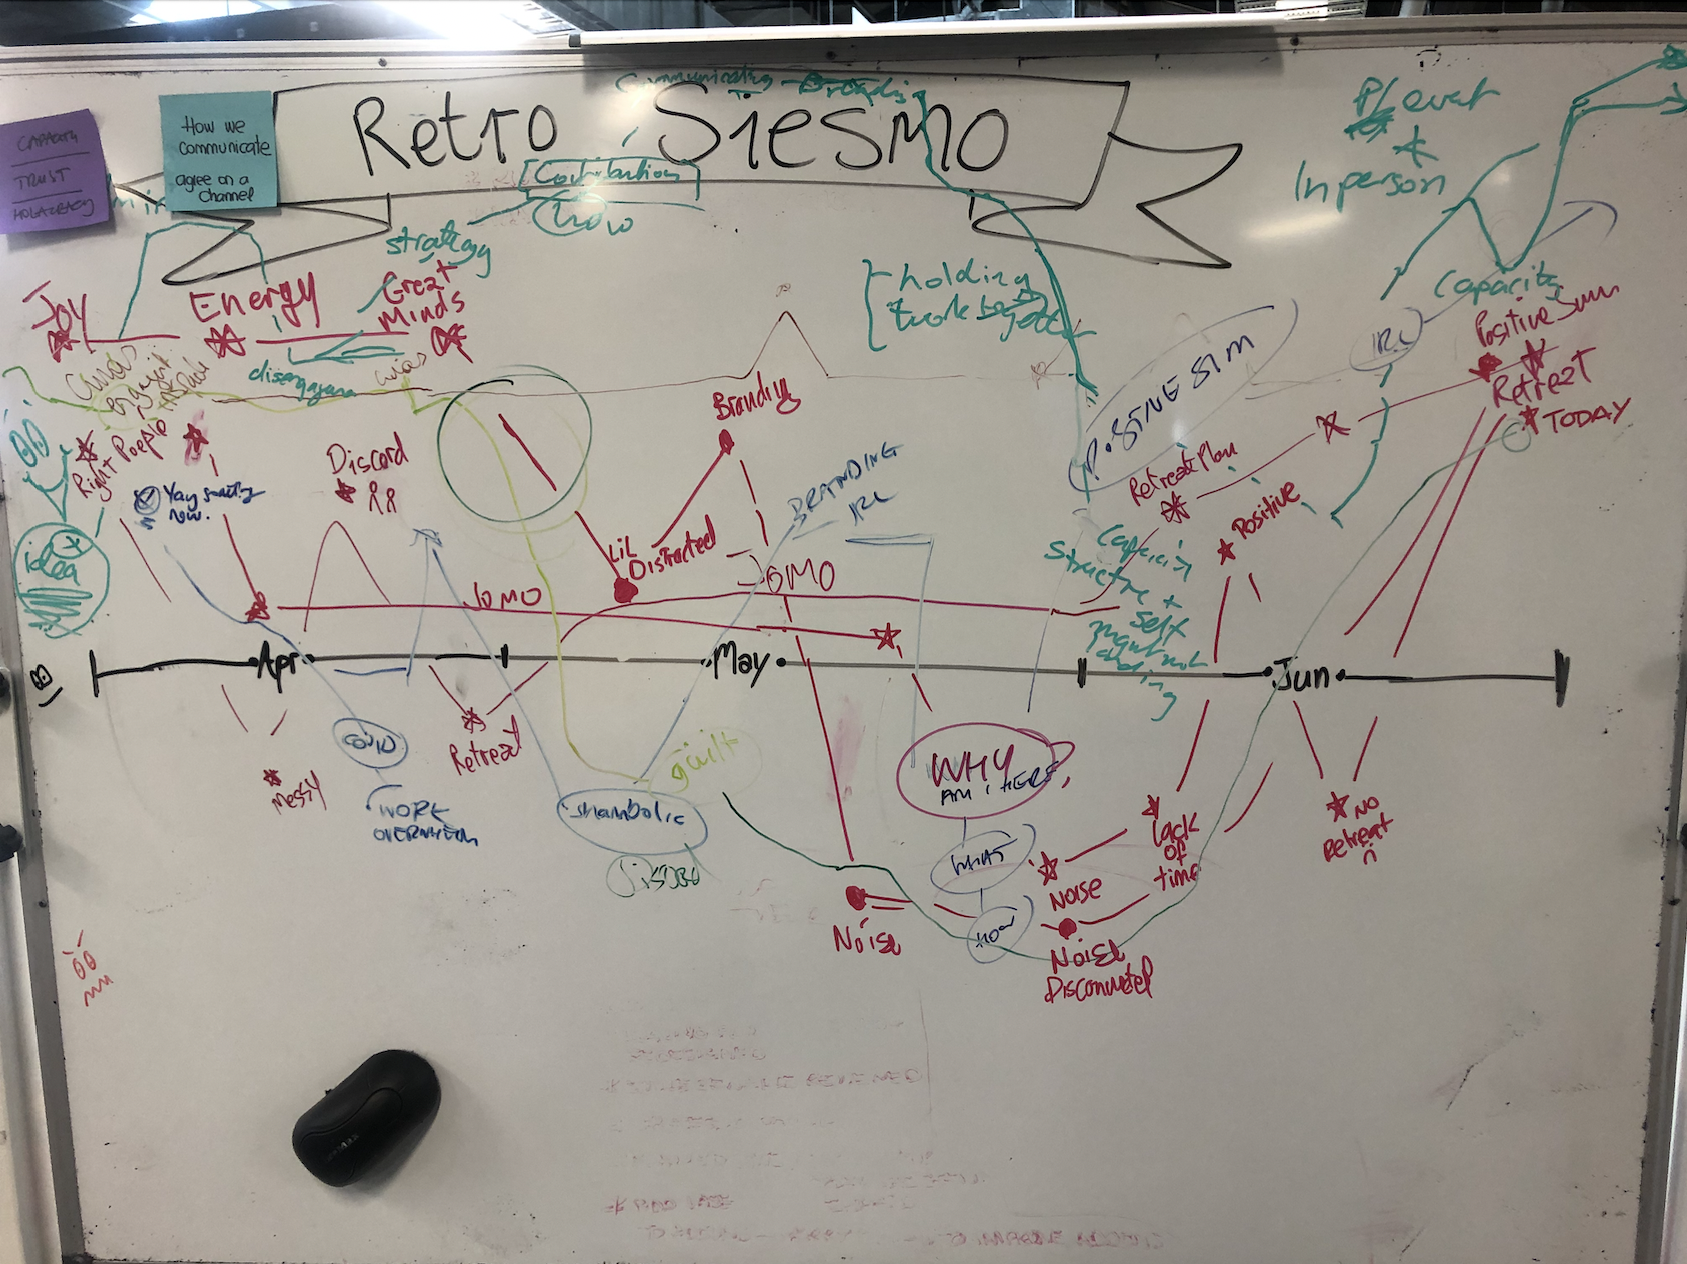 Our messy retro 'seismograph' showing our ups and downs and collapse of energy/capacity part way through